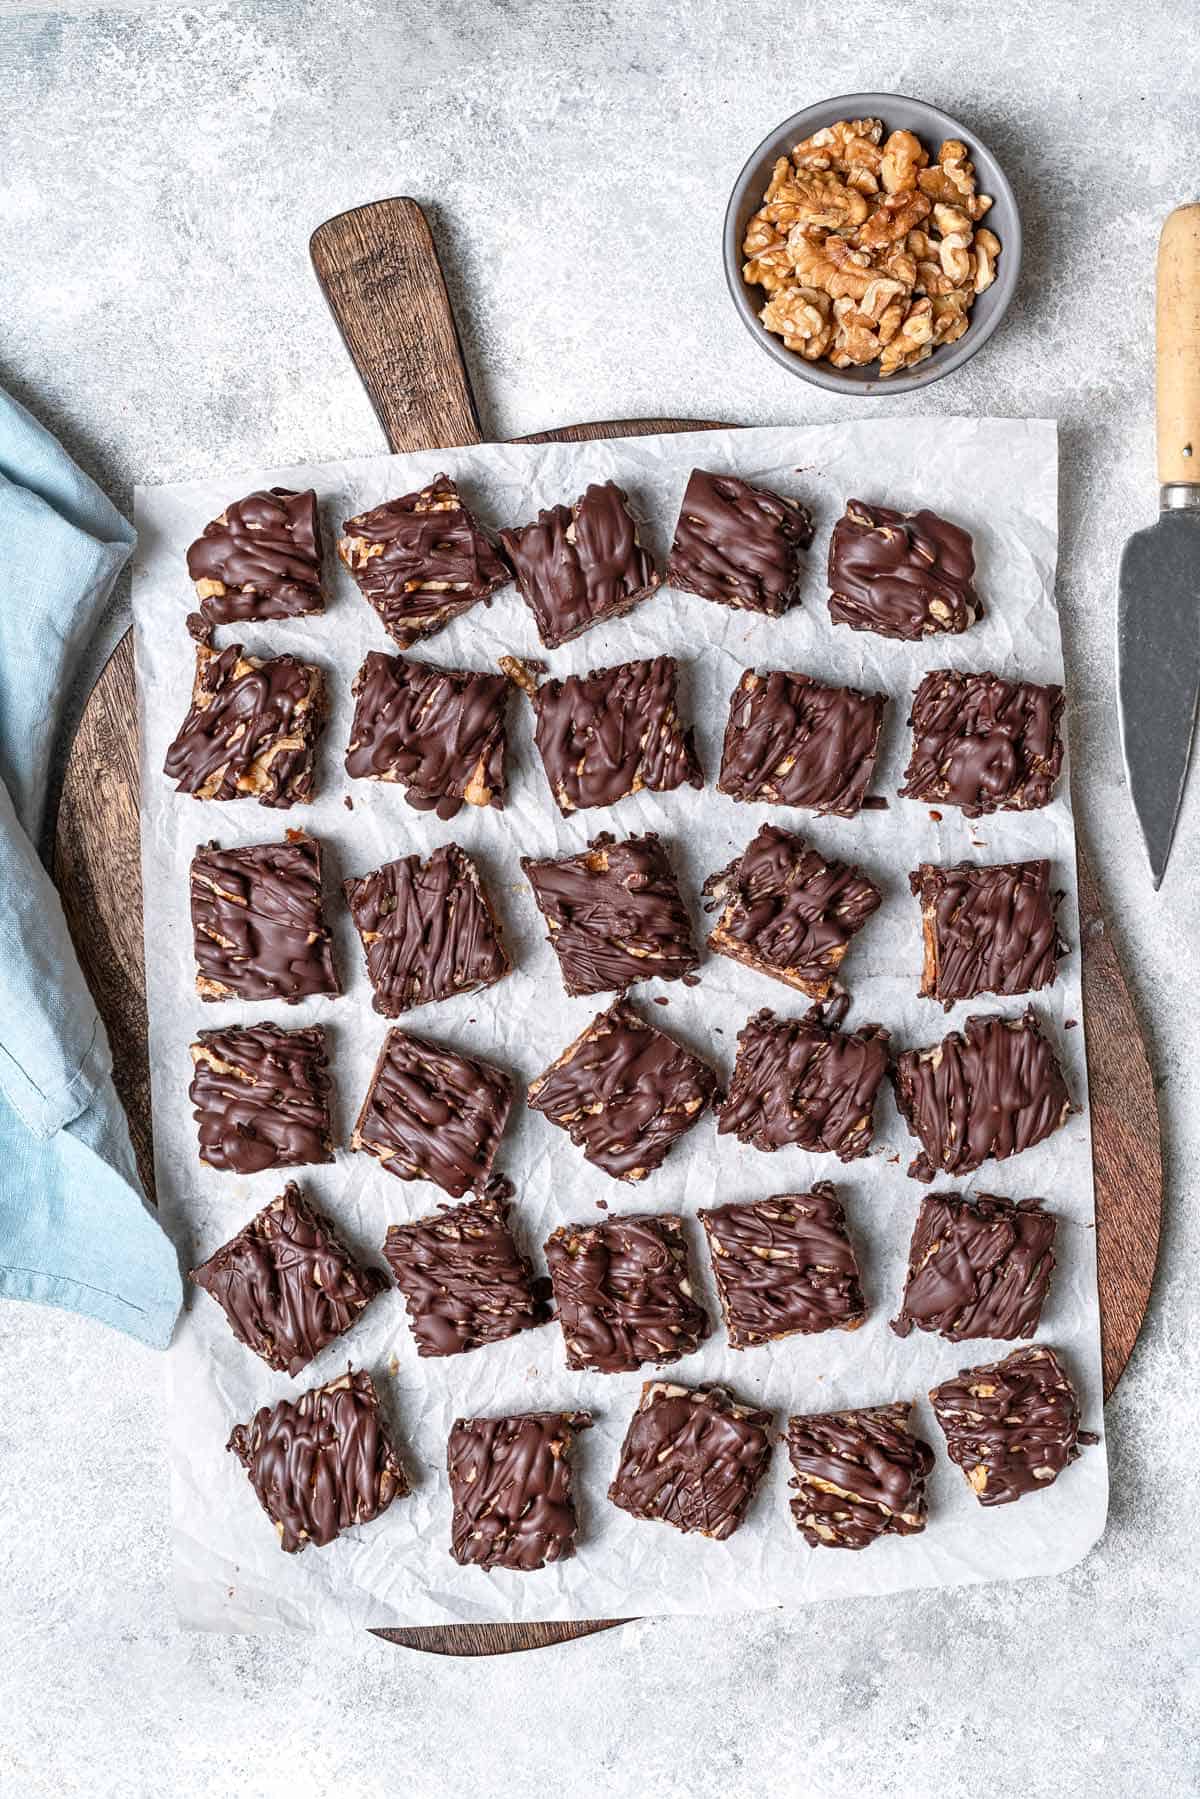 a whole batch of chocolate covered date bars on a parchment-lined serving tray next to a bowl of walnuts and a knife.